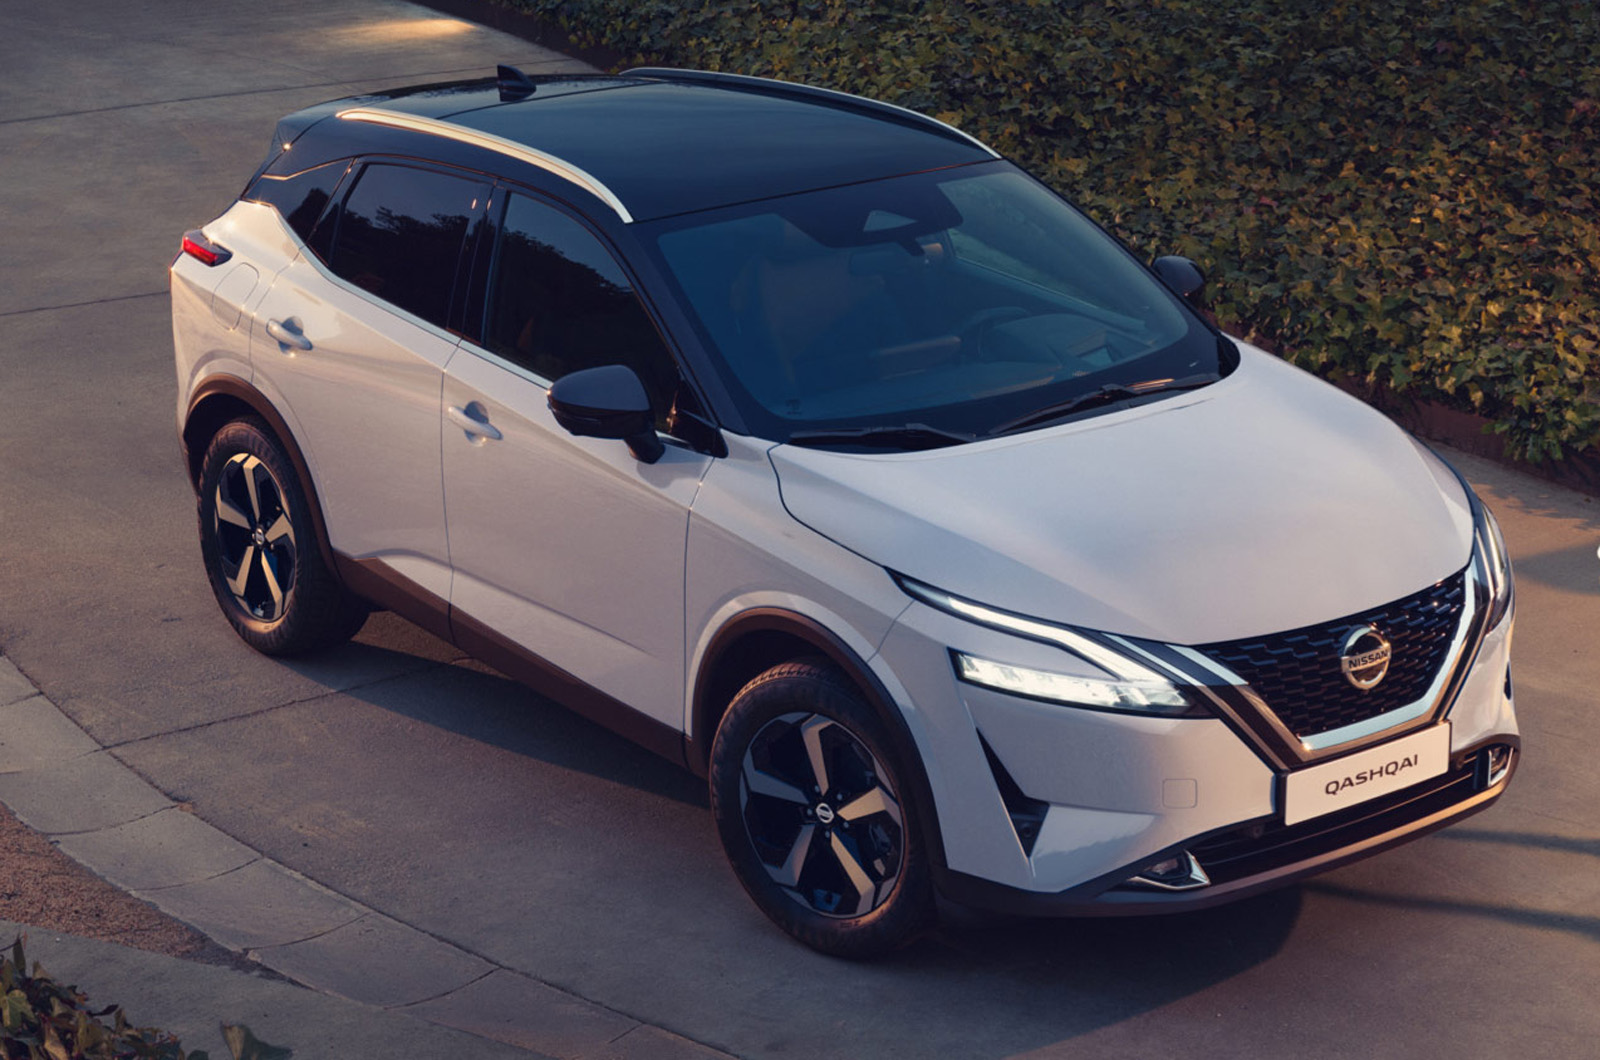 New 2021 Nissan Qashqai electrified SUV on sale from £23,535 Autocar